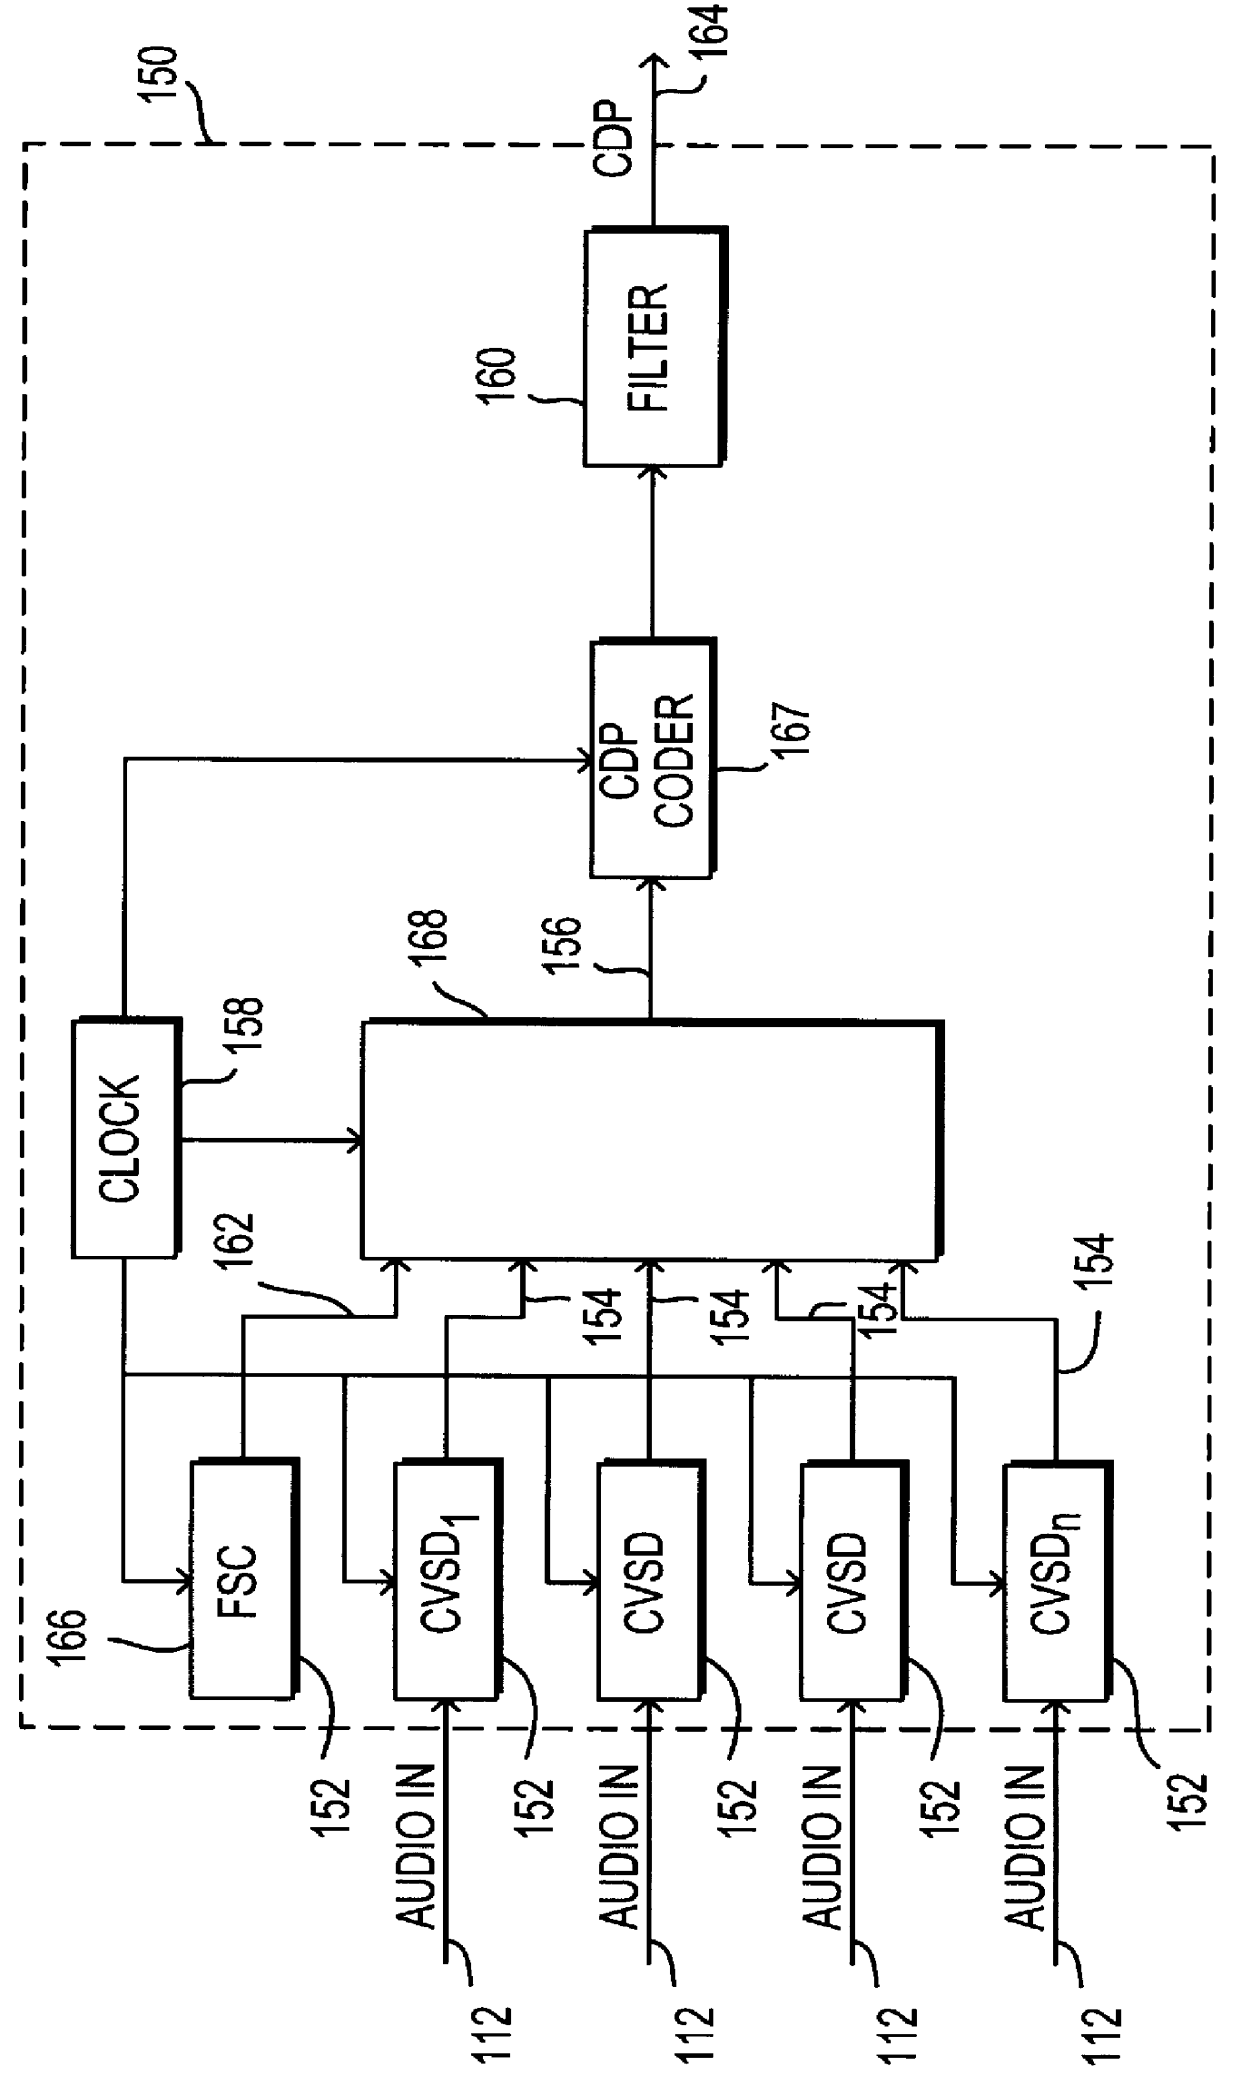 Wireless speaker system for transmitting analog and digital information over a single high-frequency channel